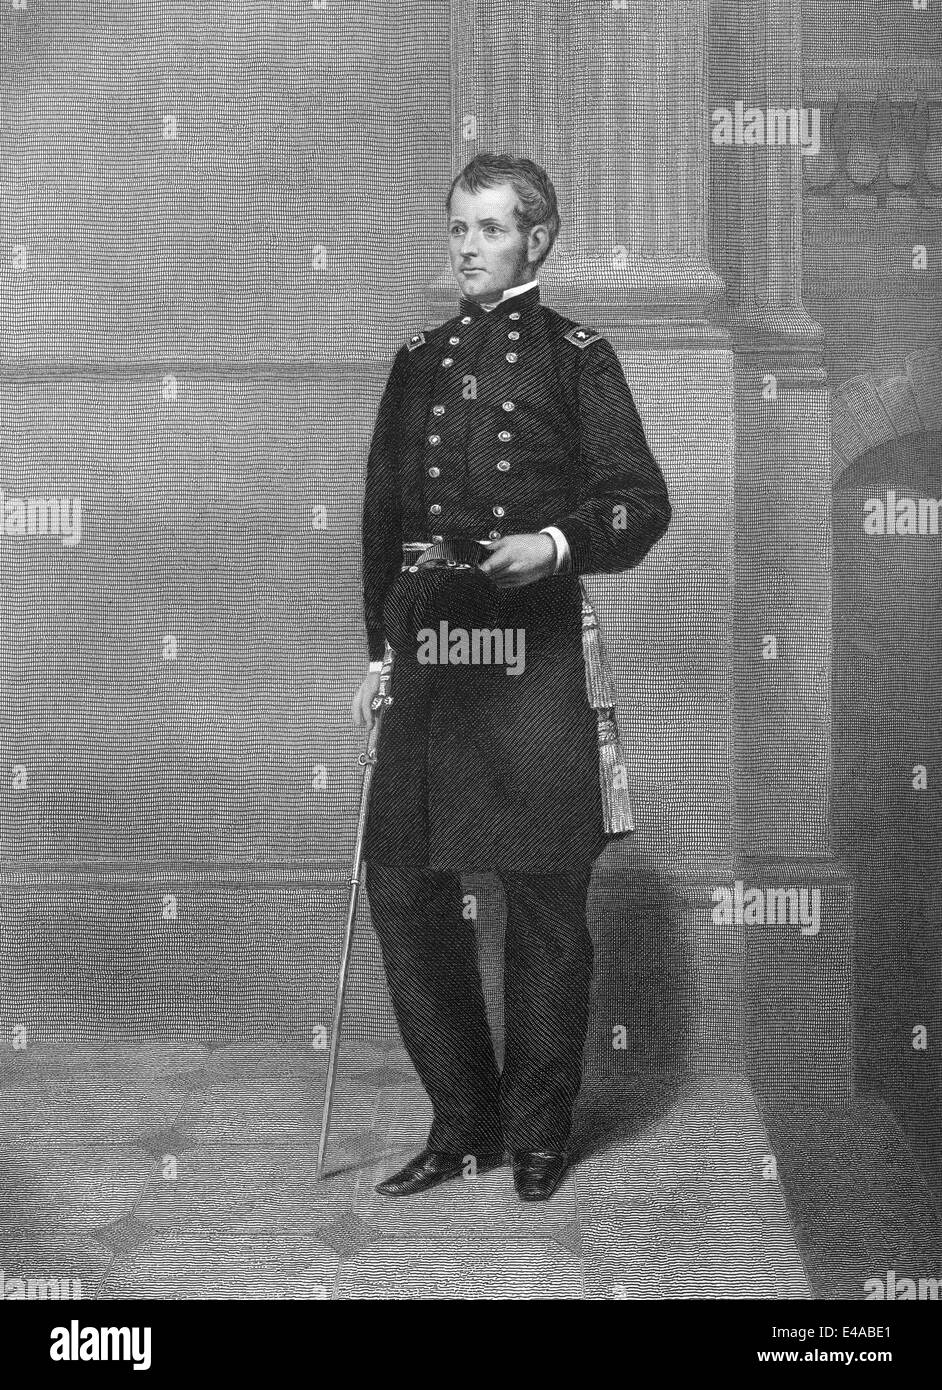 Joseph Hooker, 1814 - 1879, a United States Army officer, Stock Photo